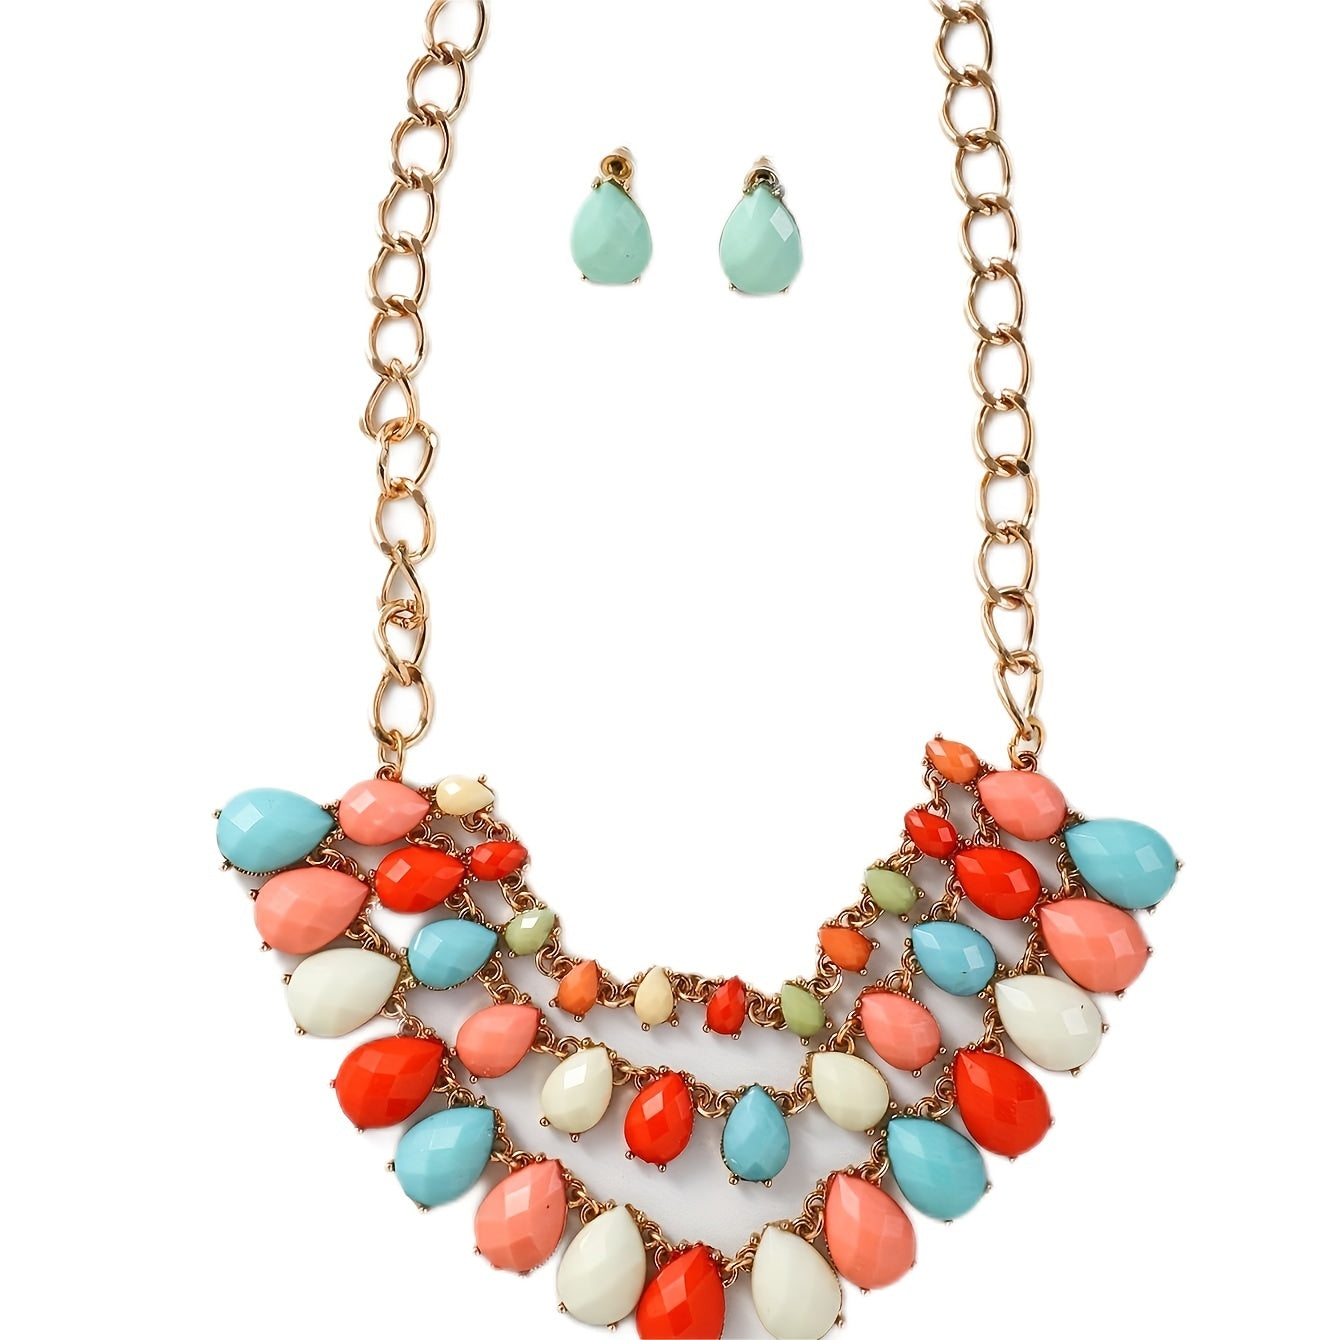 Candy Color Tassel Gemstone Colorful Statement Necklace Bib Necklace Vacation Holiday Decoration Jewelry